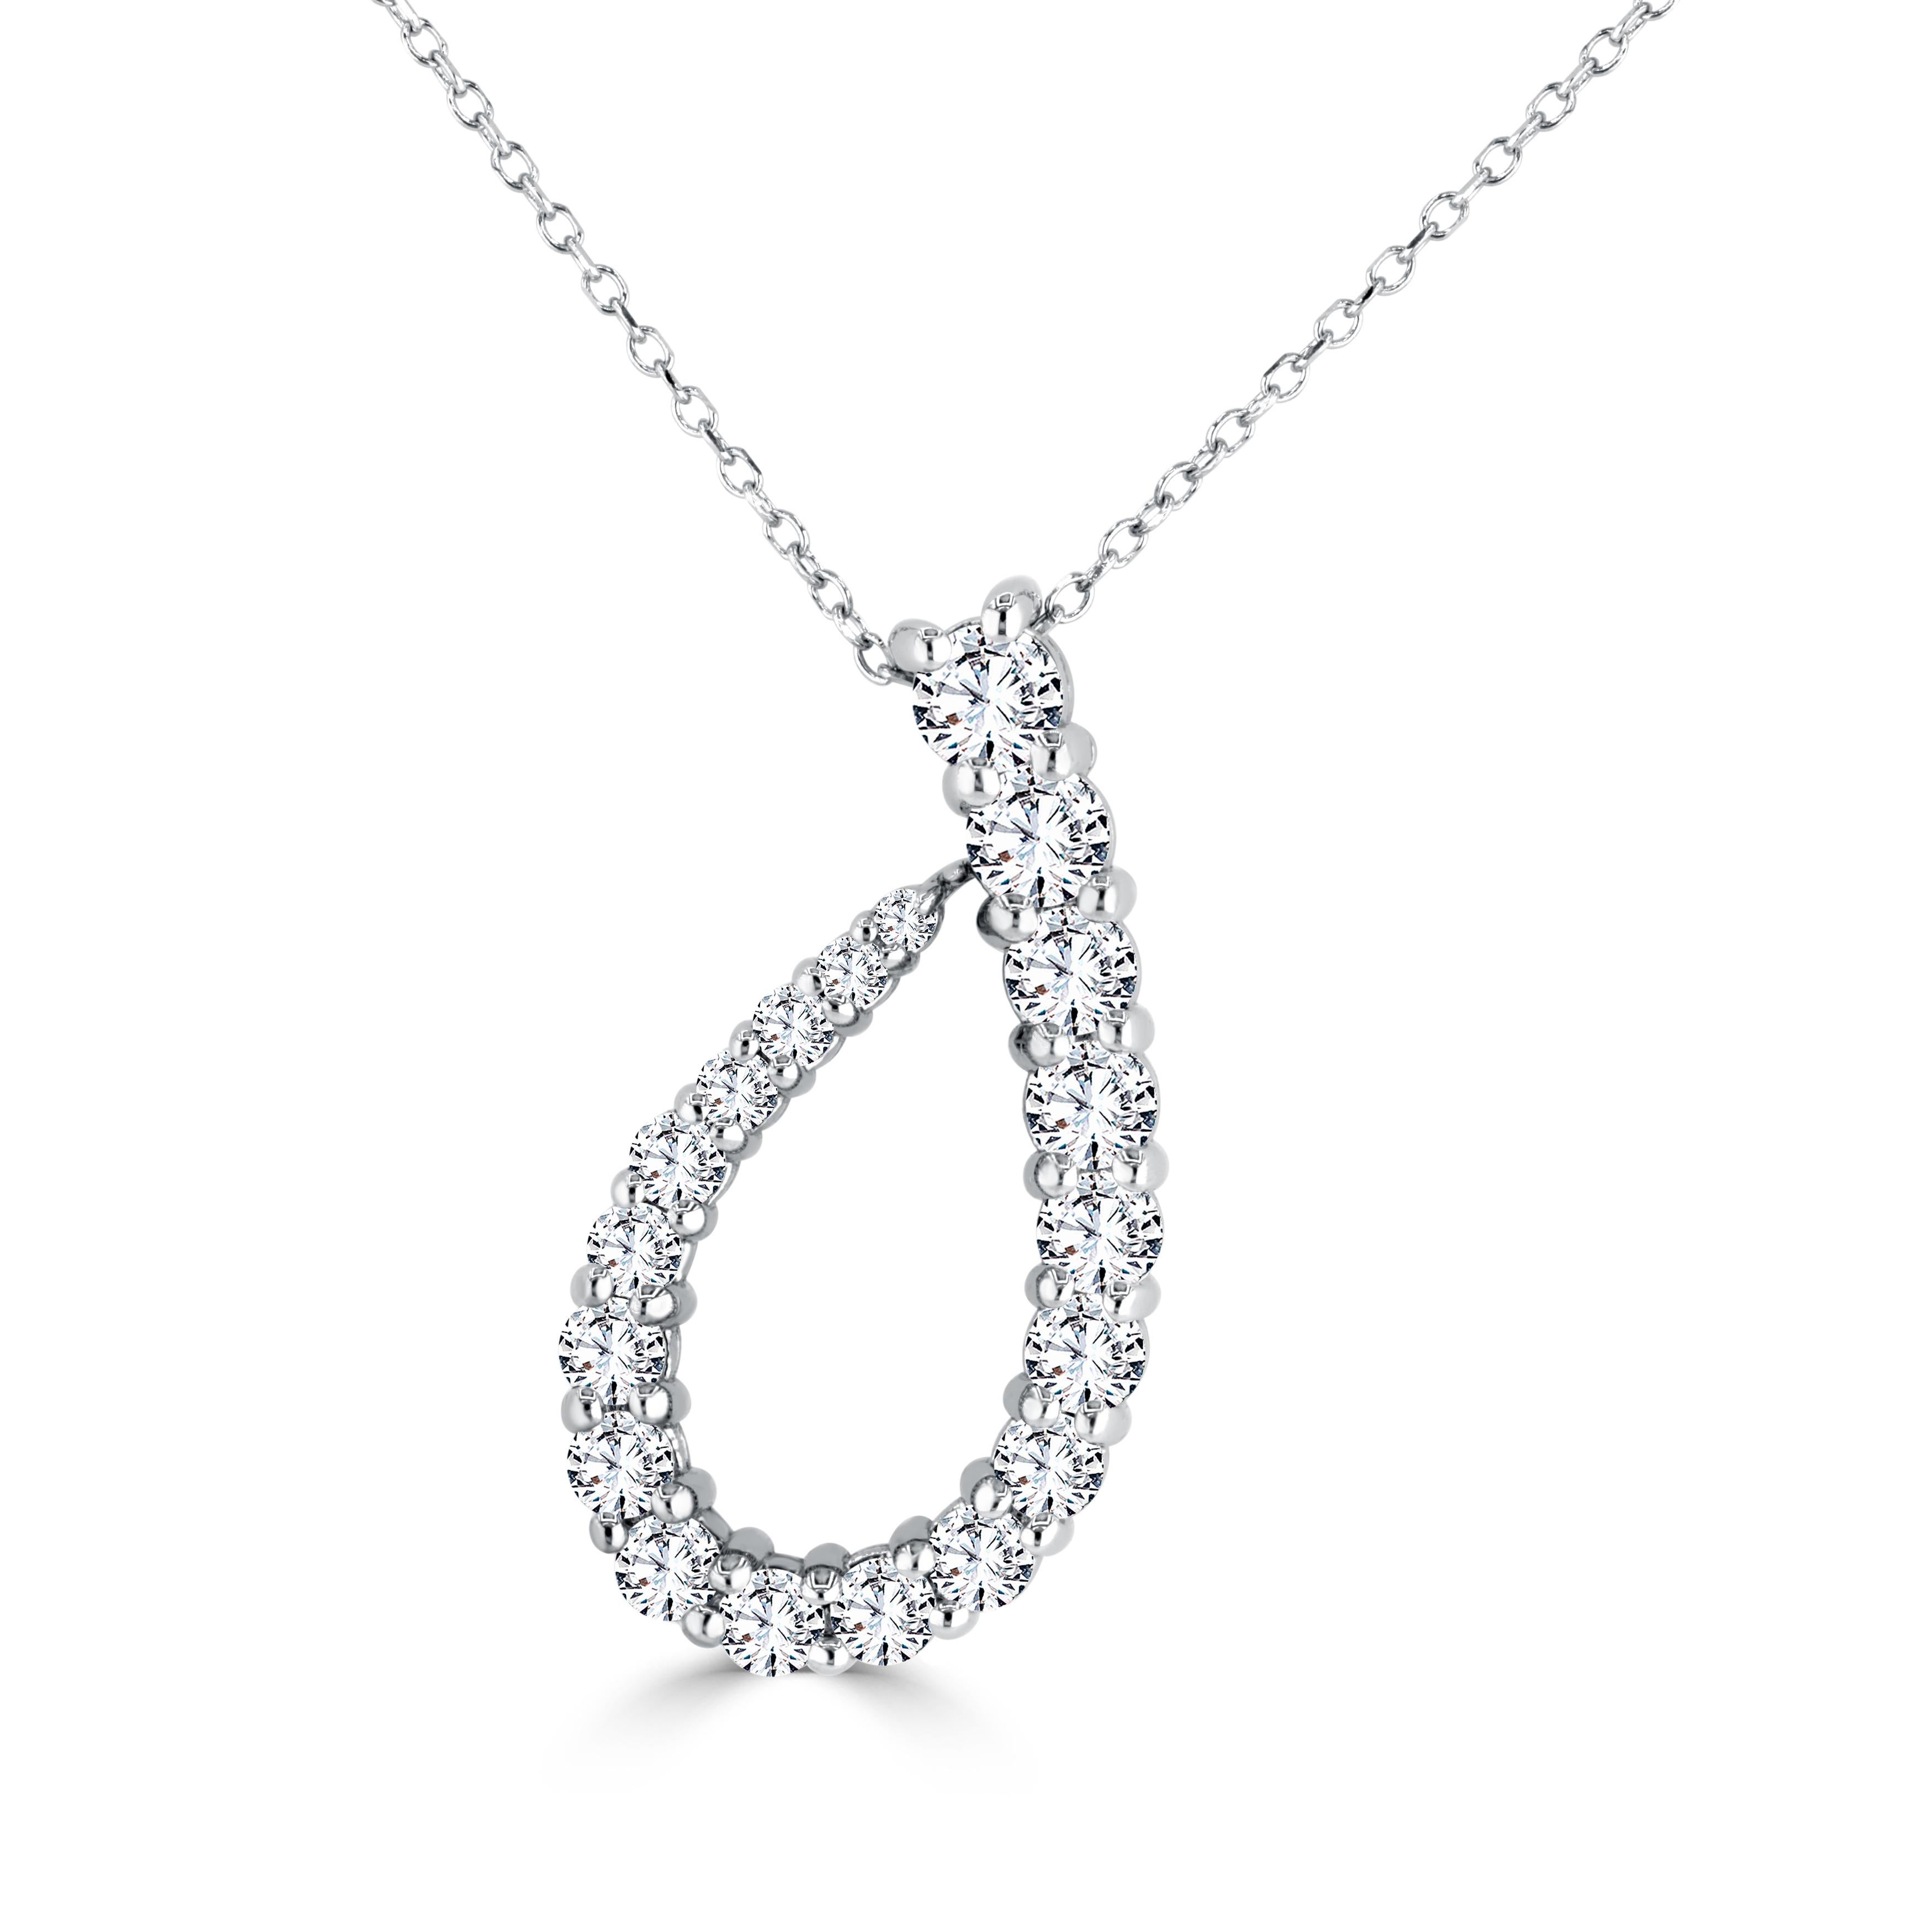 Adorning this pendant are twenty pristine, natural white diamonds, meticulously handpicked to ensure unrivaled brilliance. These diamonds gradually increase in size towards the bottom of the pendant, forming an asymmetric design that culminates in a